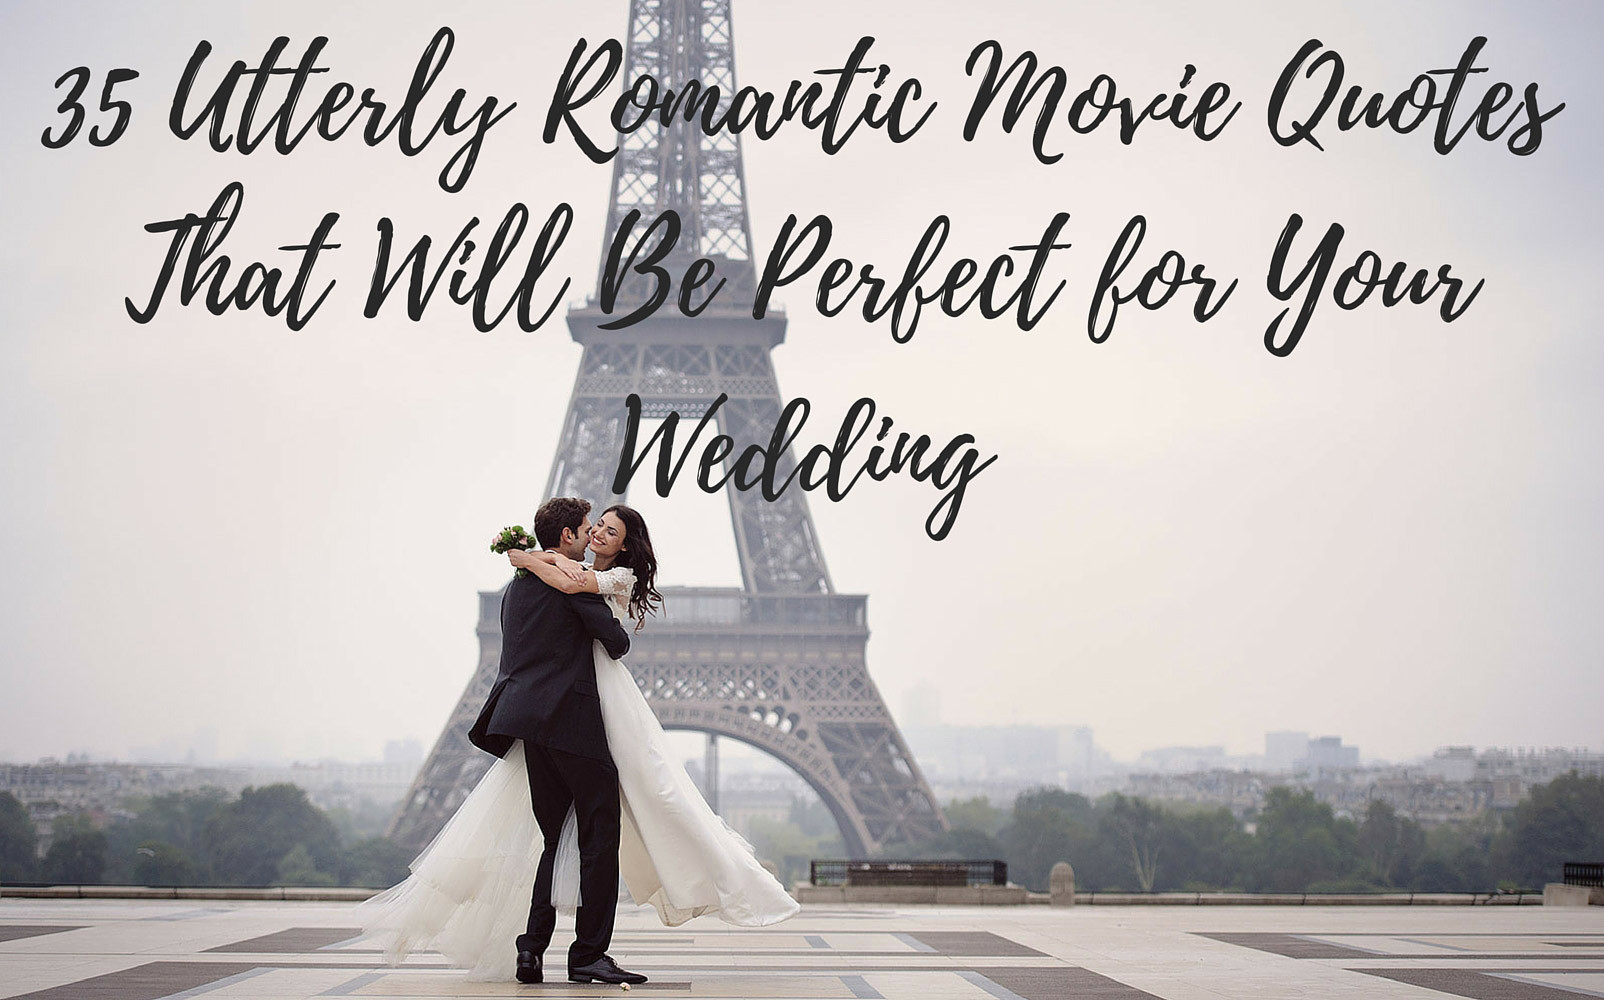 Movie Quotes About Marriage
 Utterly Romantic Quotes from Movies